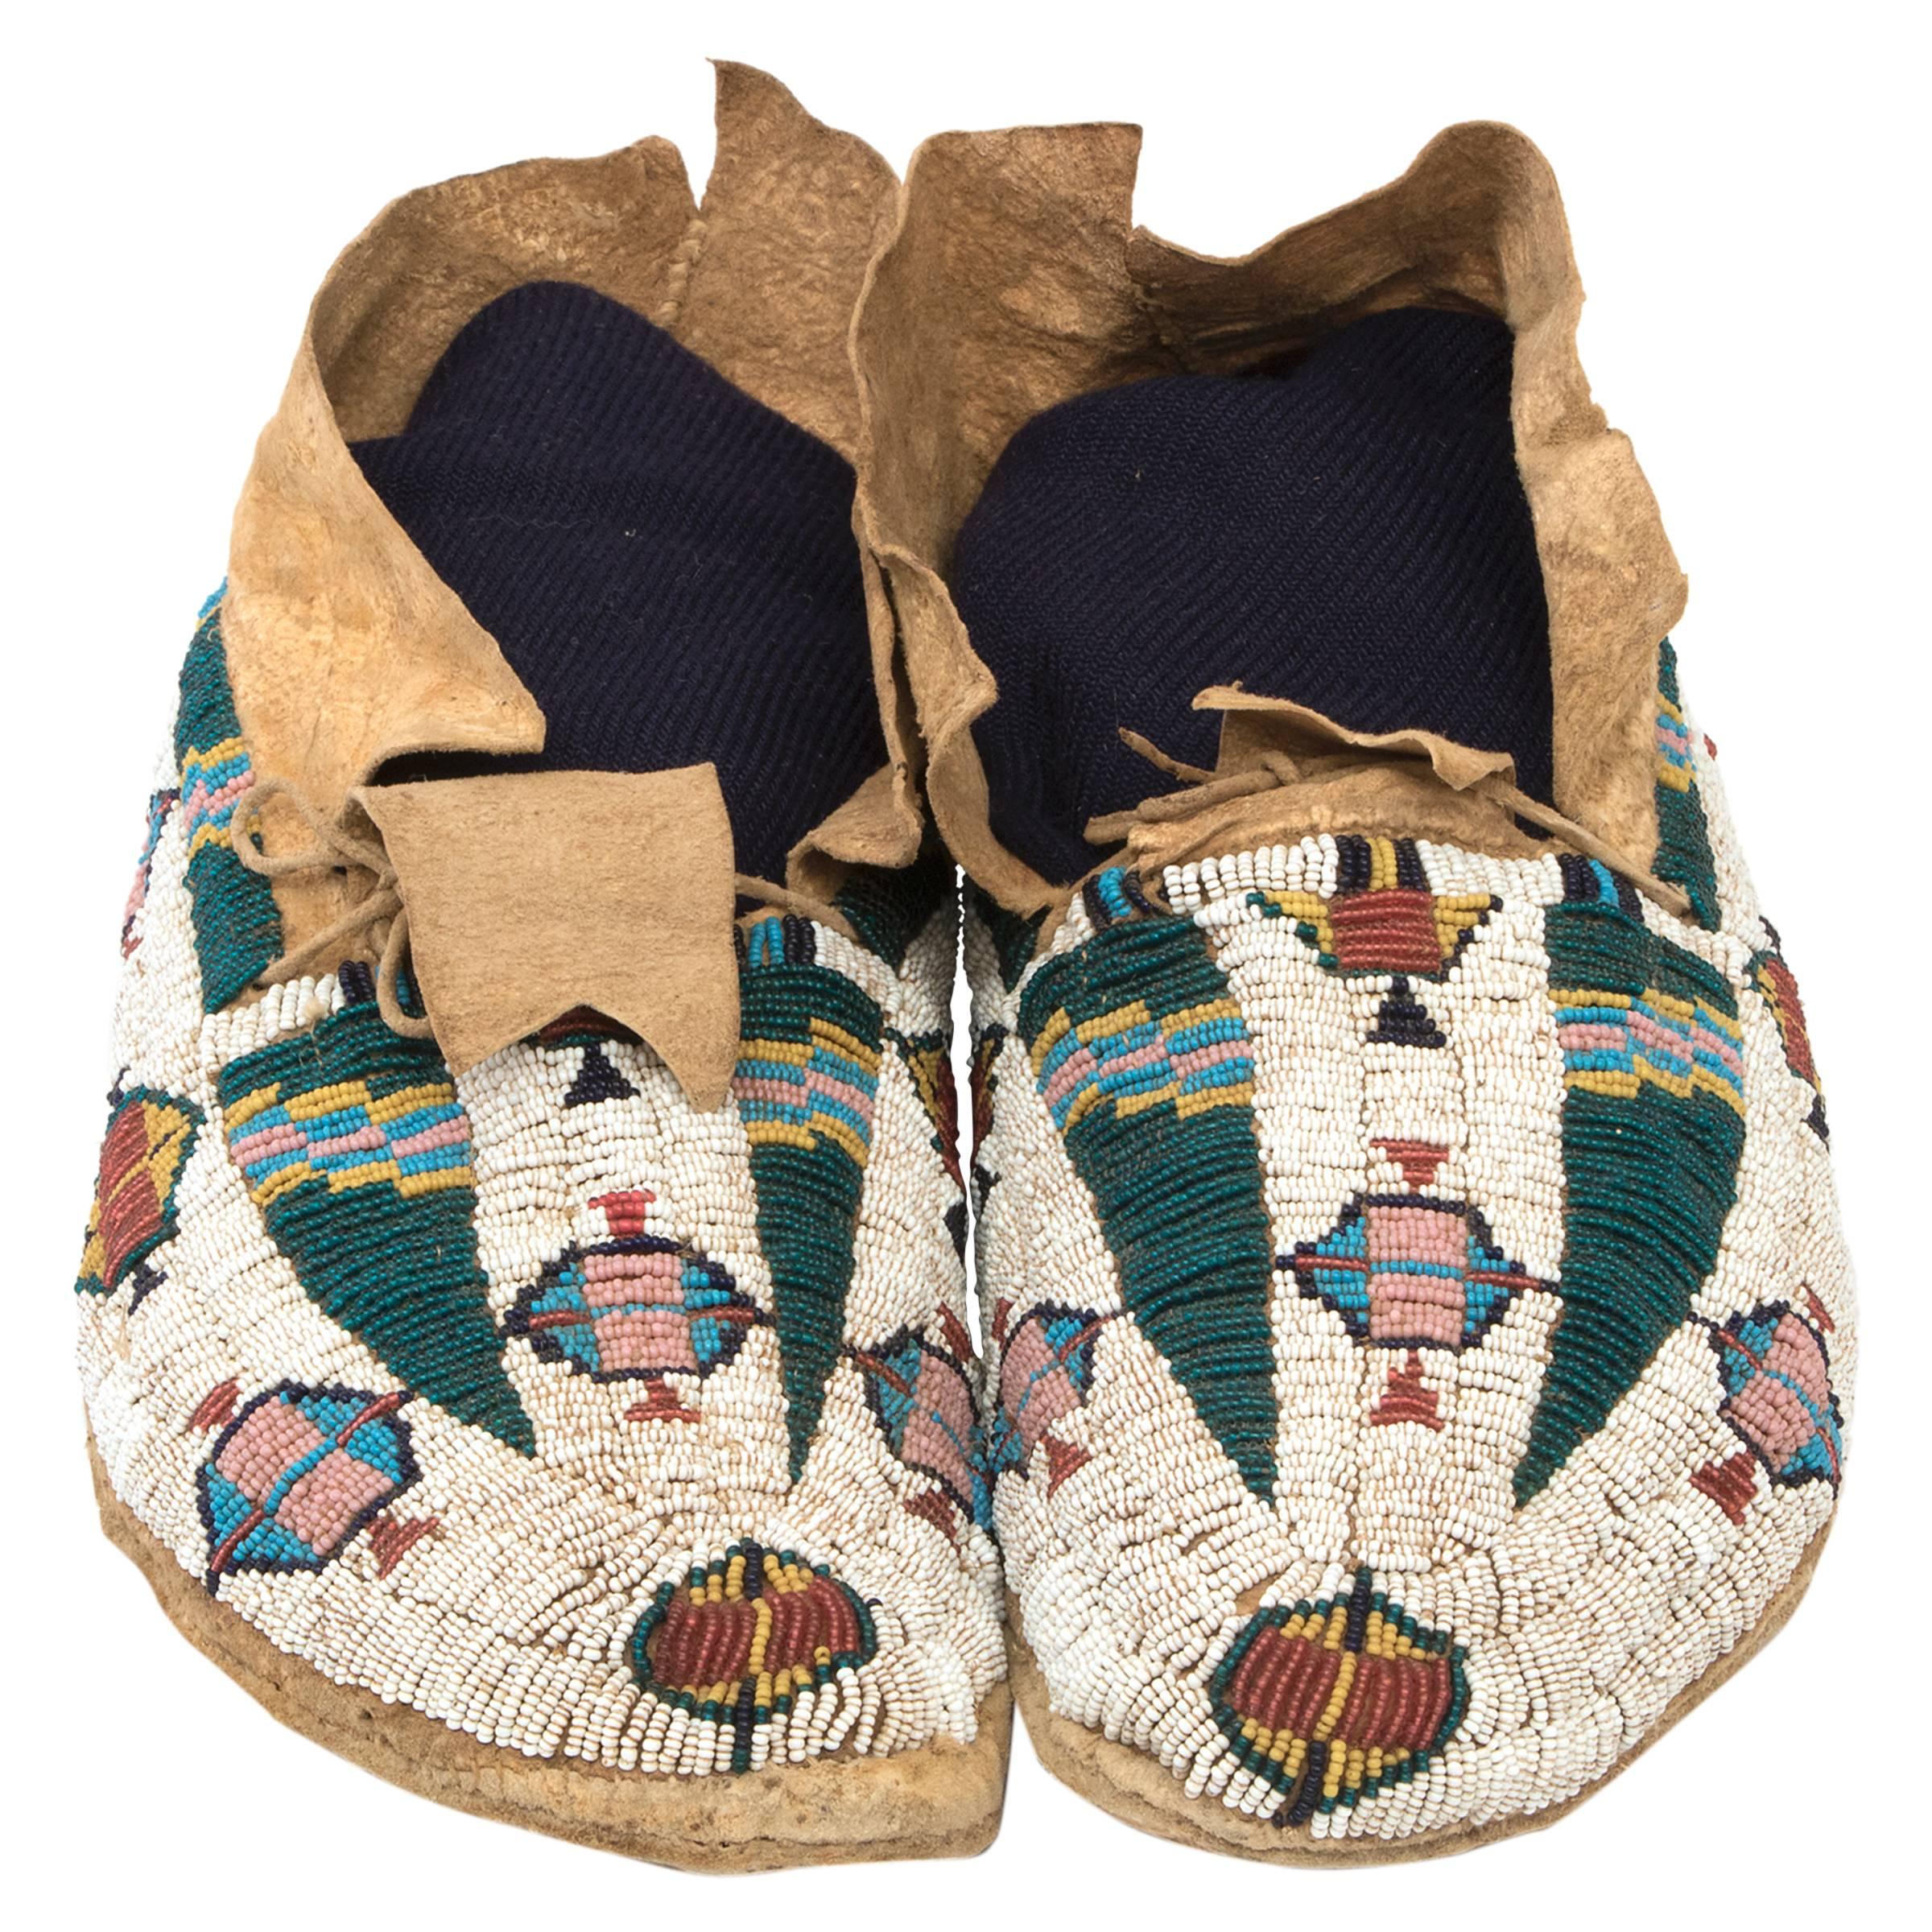 Antique Native American Pictorial Beaded Moccasins, Cheyenne, 19th Century